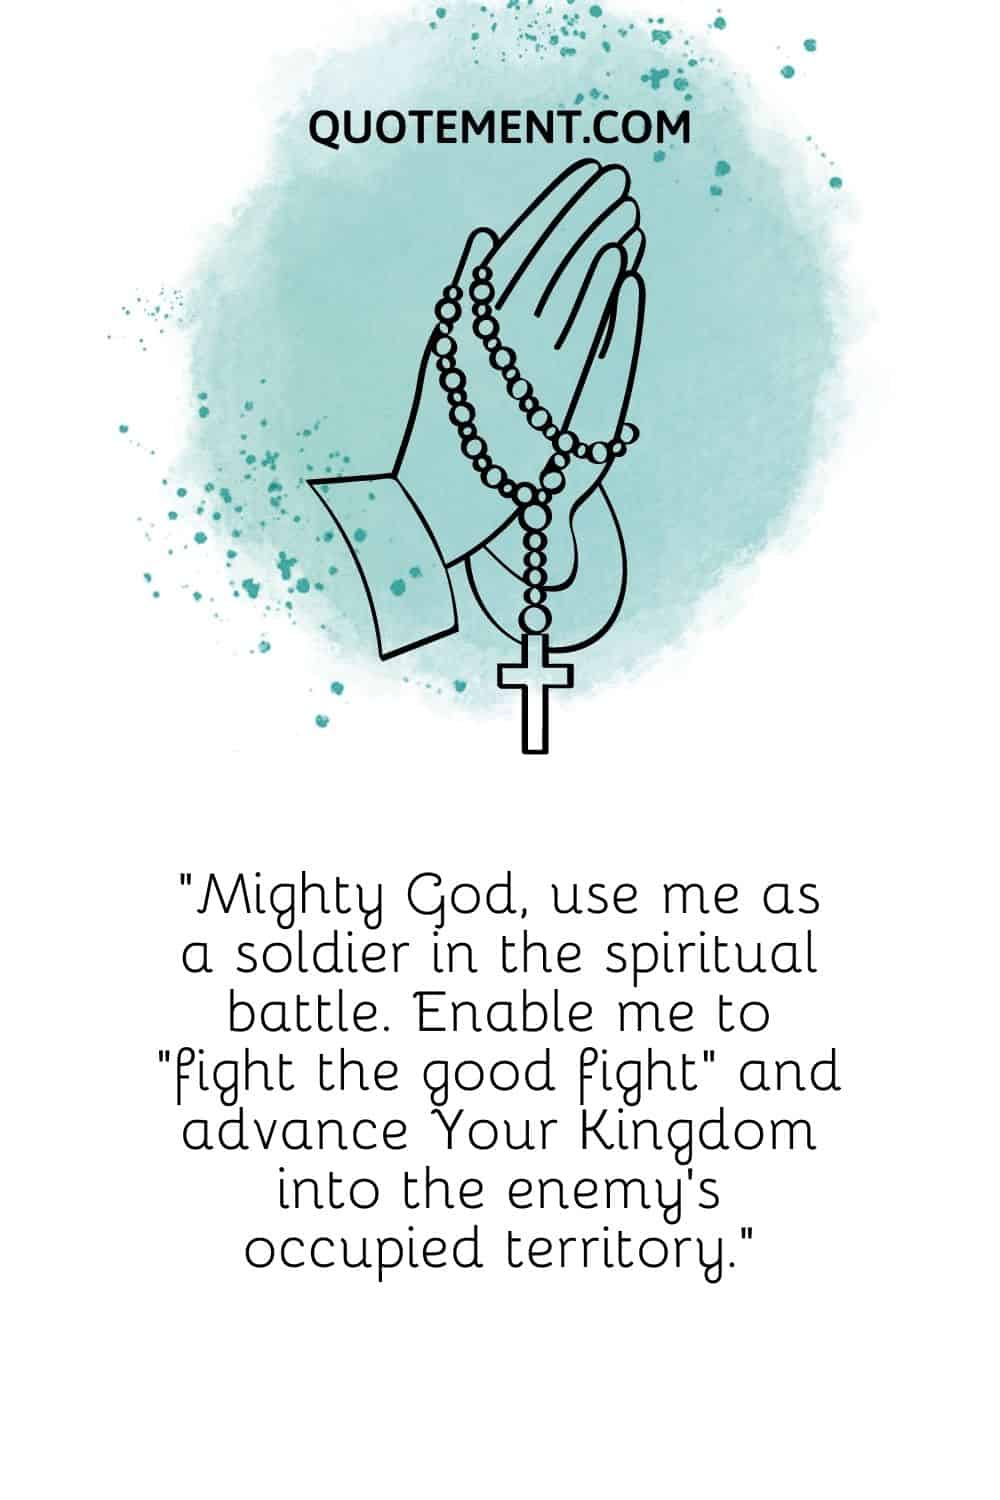 Mighty God, use me as a soldier in the spiritual battle.